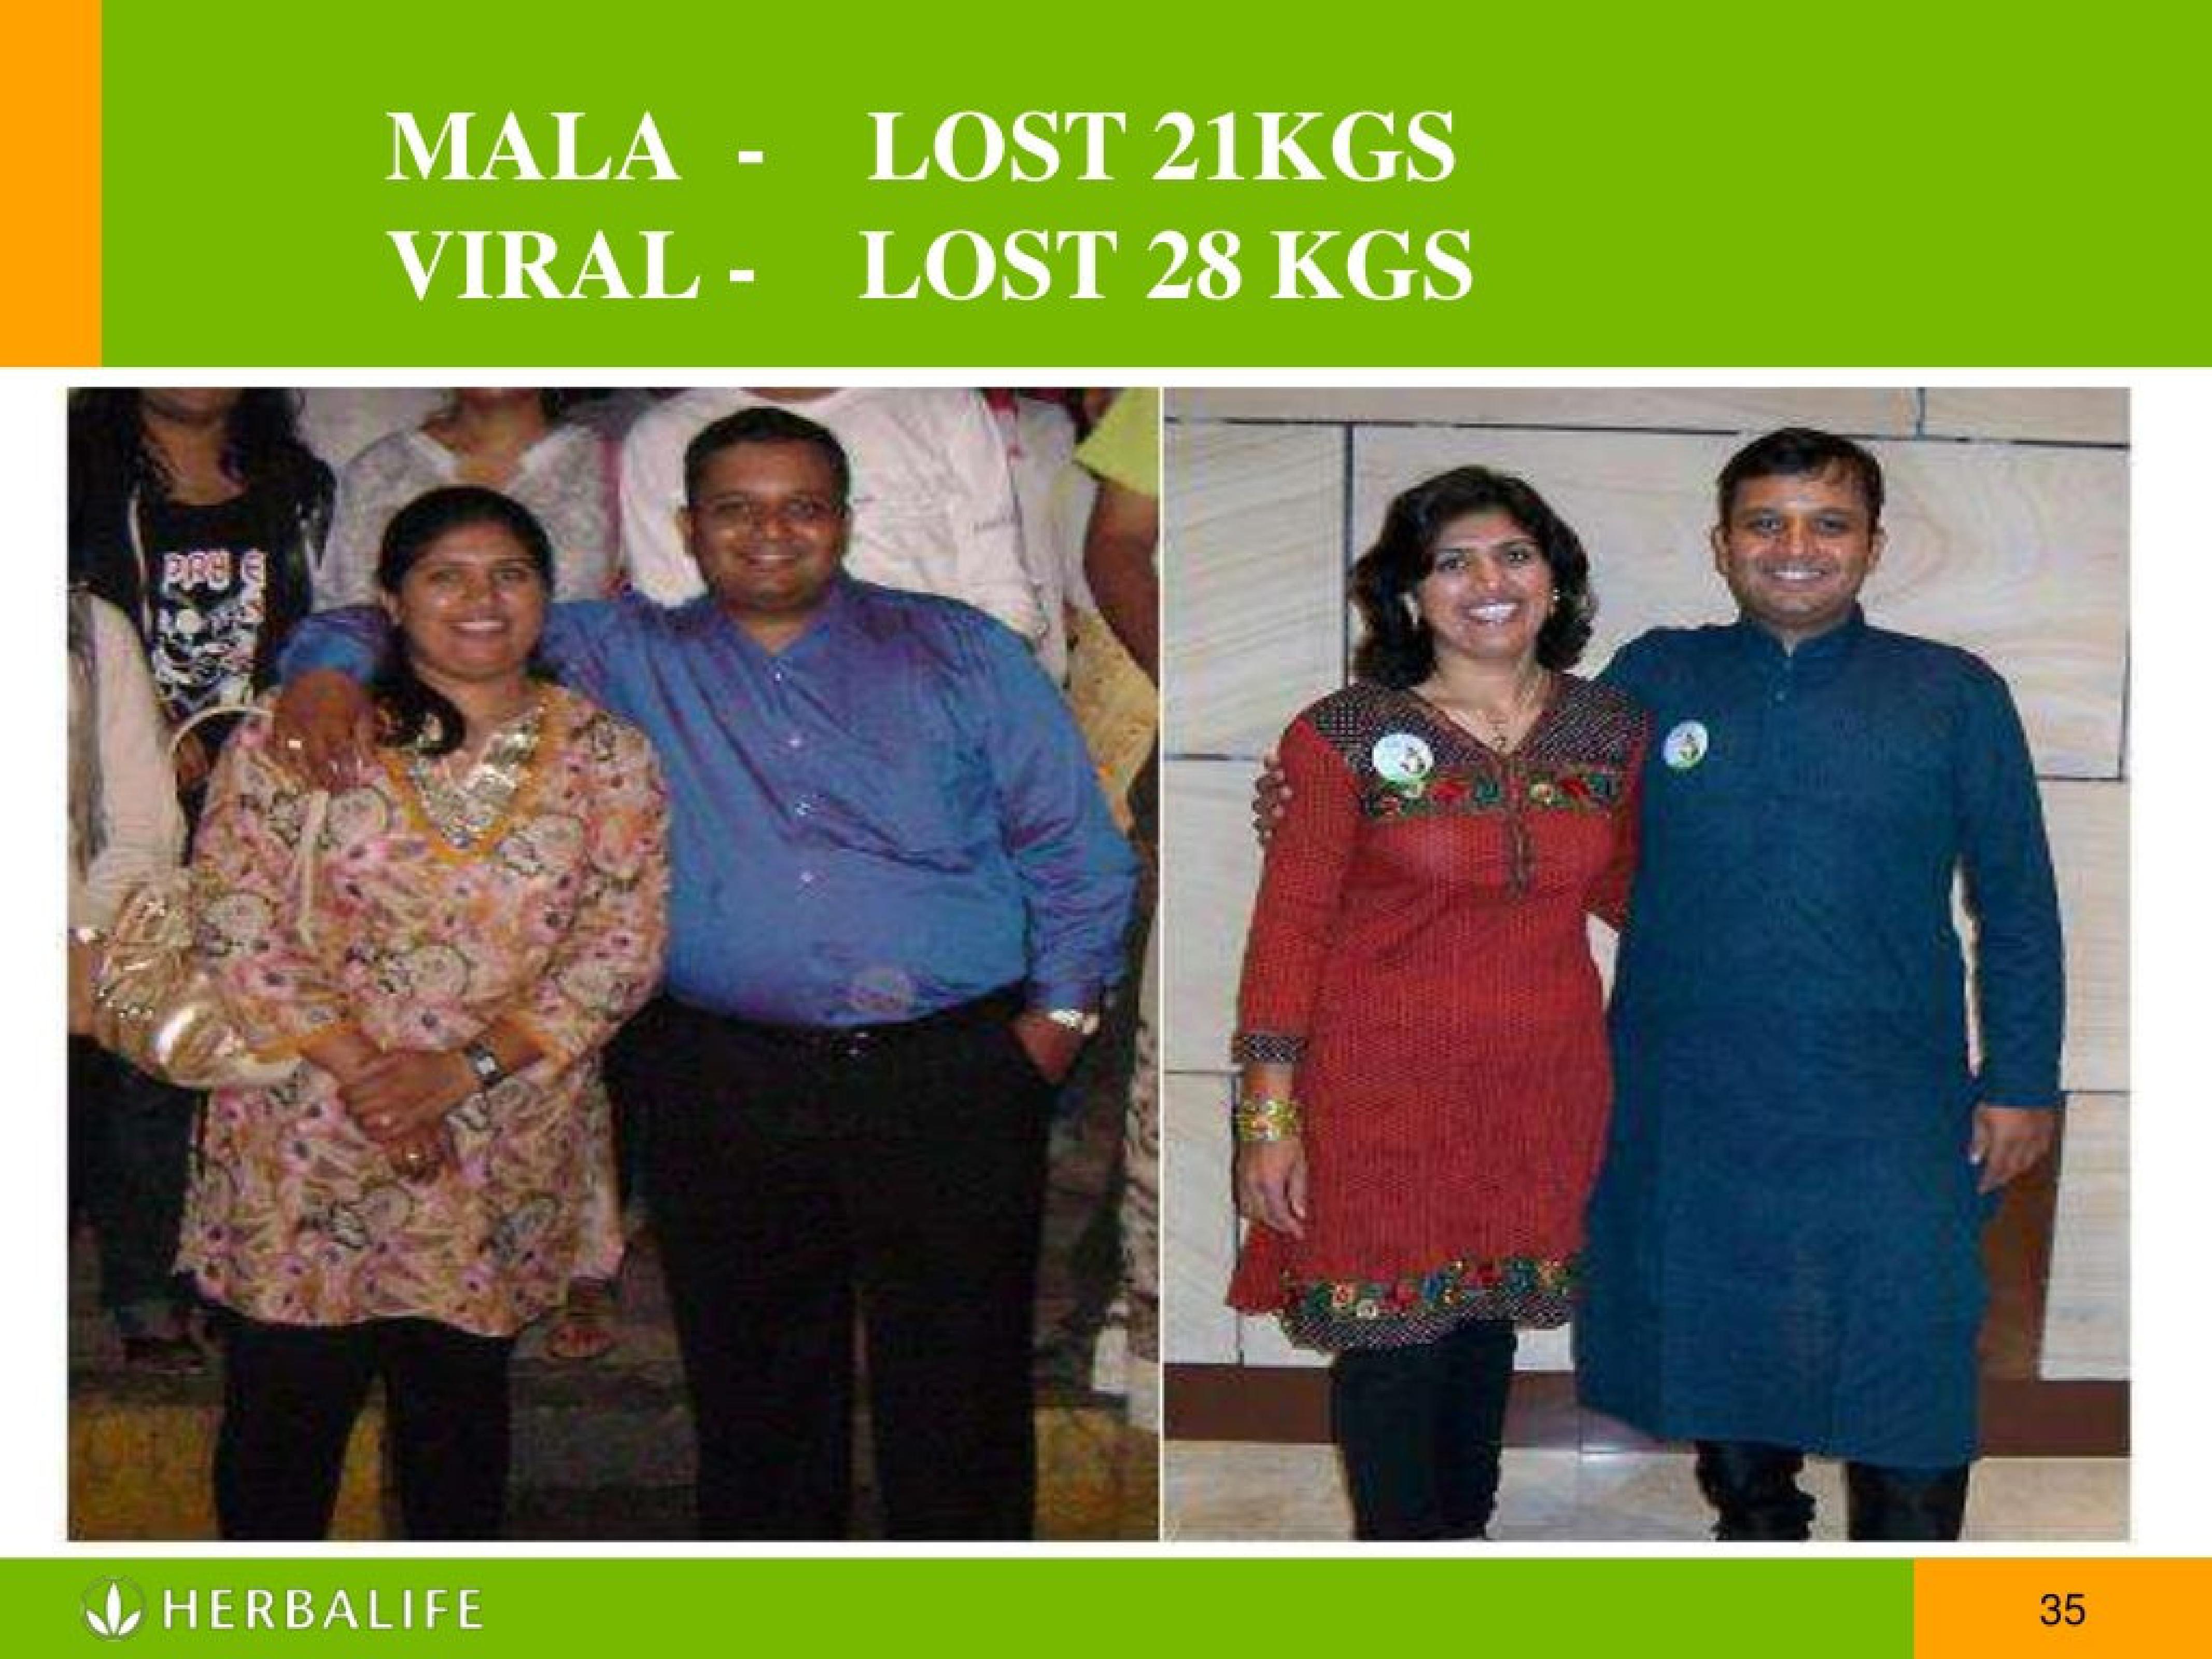 Herbalife SR Nagar Hyderabad 9160255159,Hyderabad,Services,Free Classifieds,Post Free Ads,77traders.com